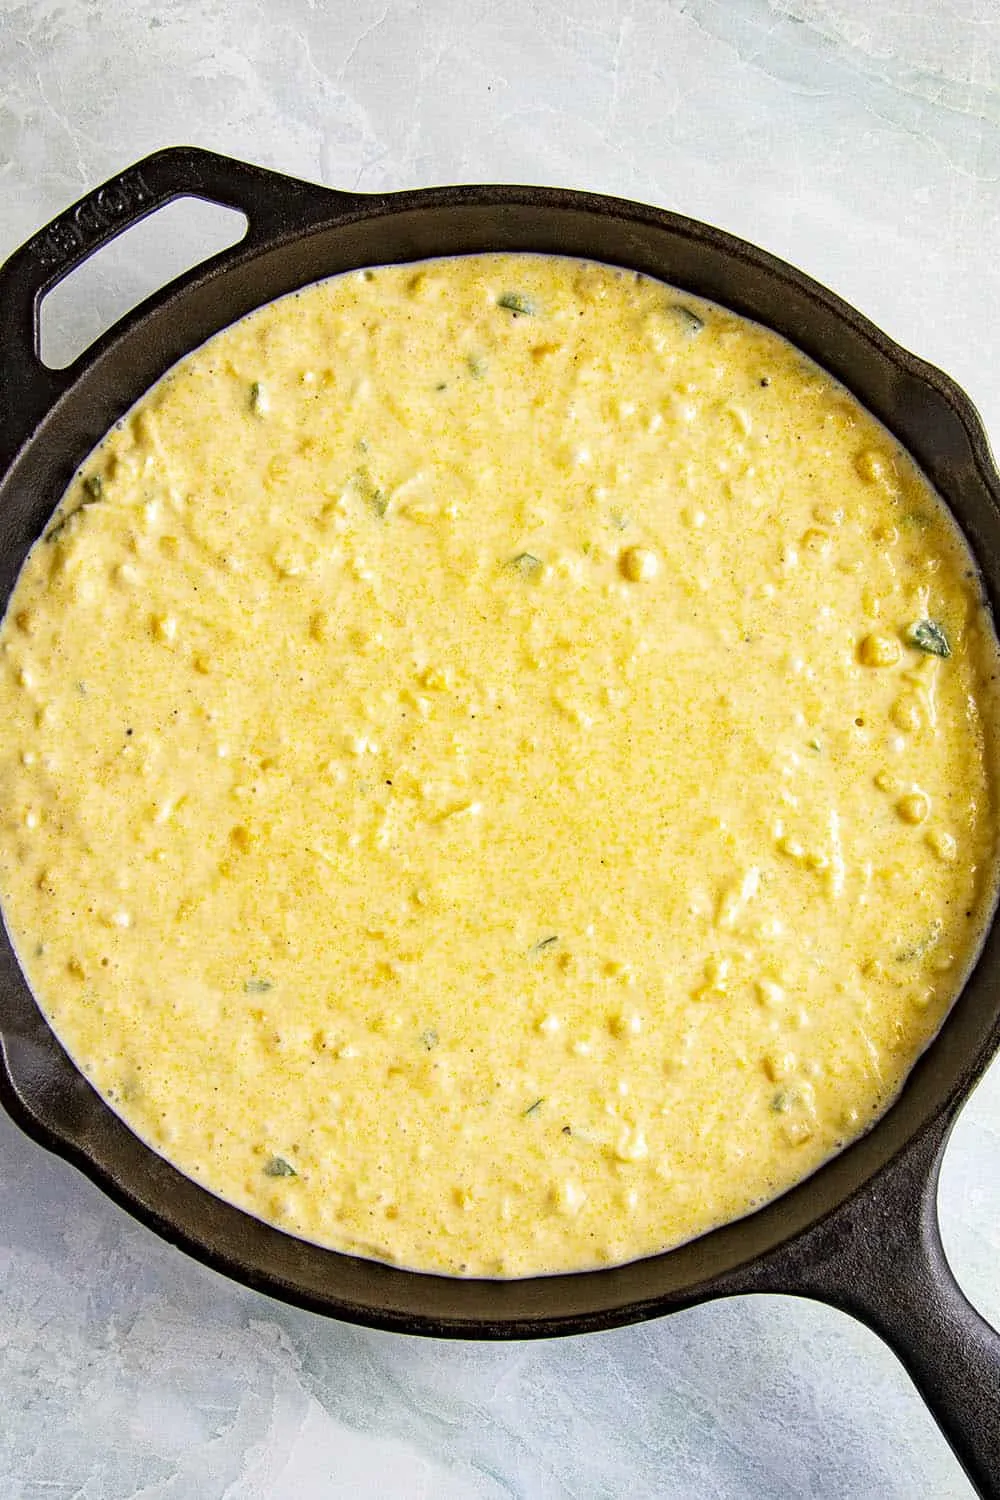 Web cornbread mix in a pan, ready to bake